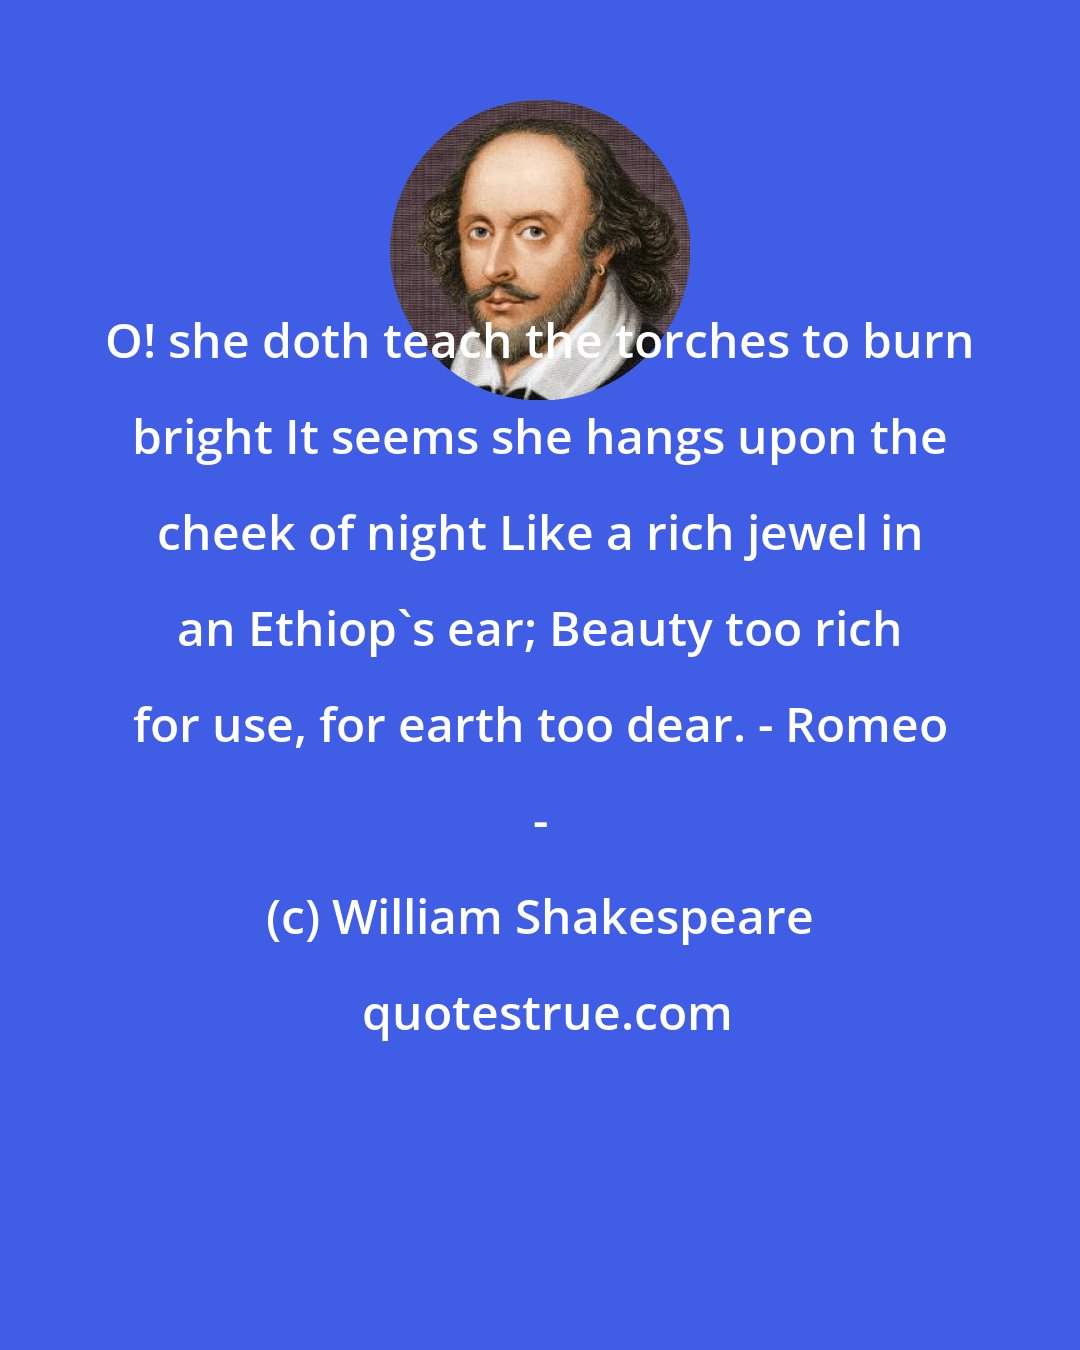 William Shakespeare: O! she doth teach the torches to burn bright It seems she hangs upon the cheek of night Like a rich jewel in an Ethiop's ear; Beauty too rich for use, for earth too dear. - Romeo -